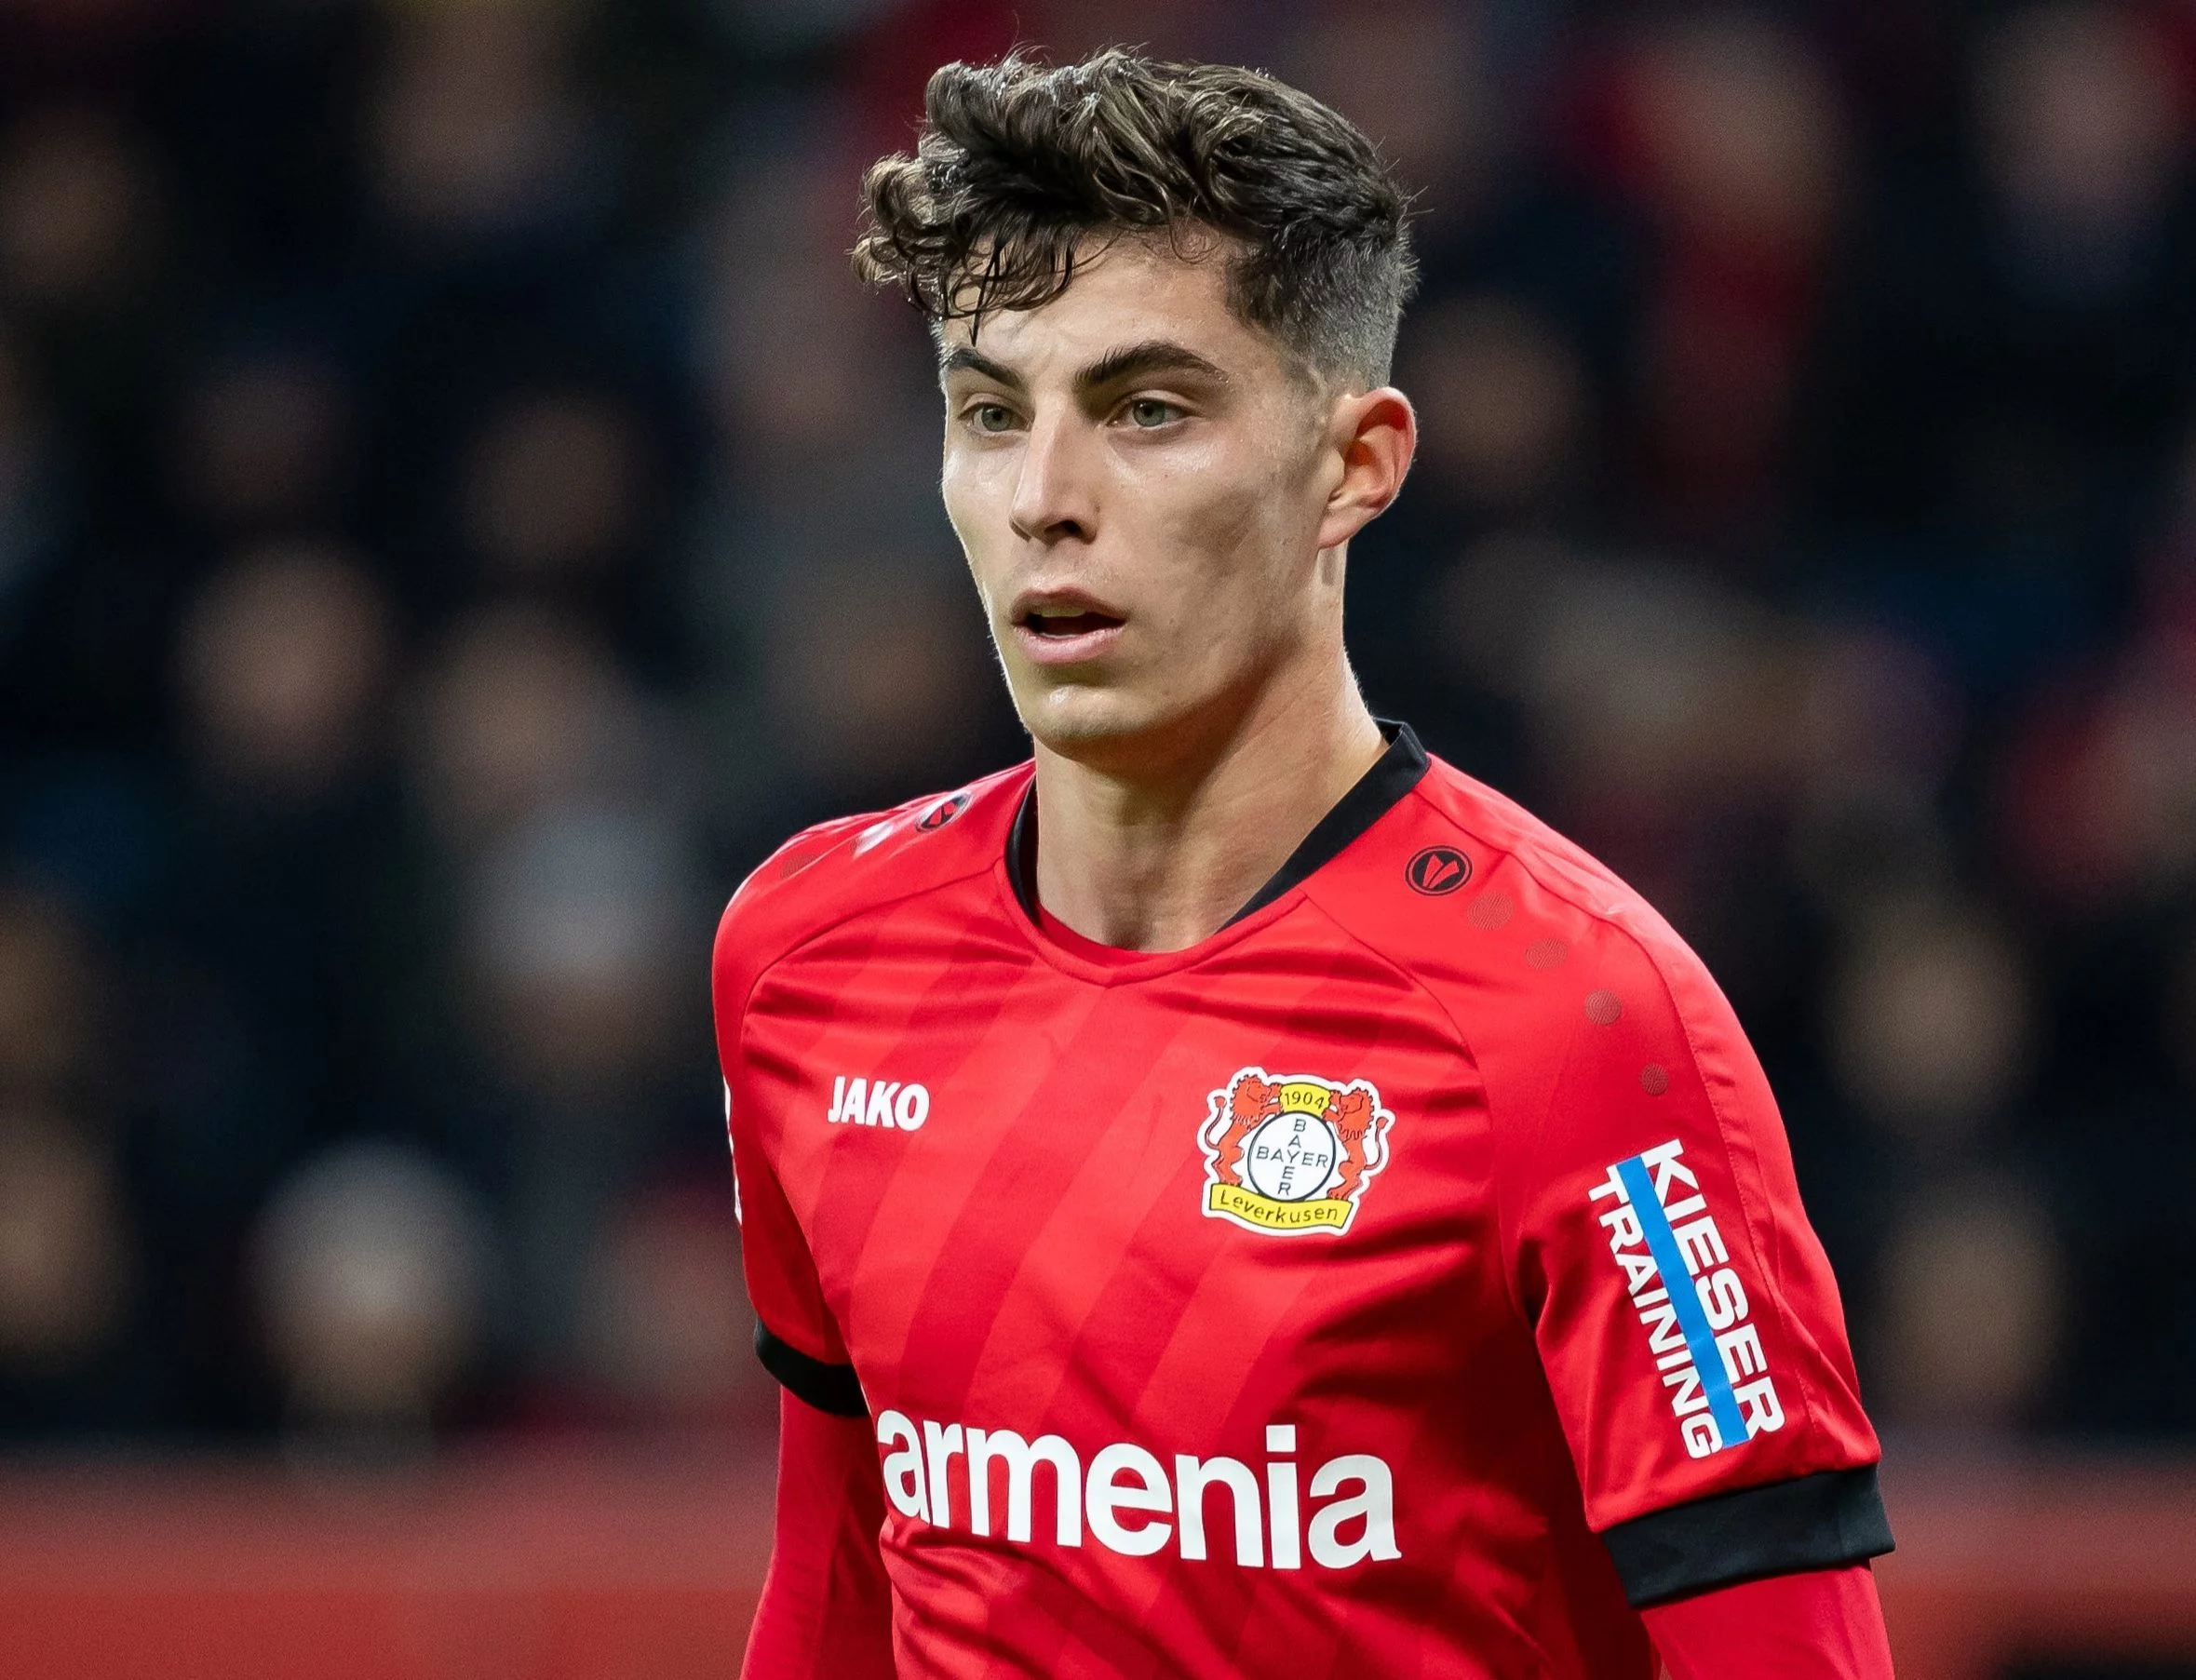 Bayer Leverkusen gives Kai Havertz conditions to leave for Chelsea - Daily Post Nigeria